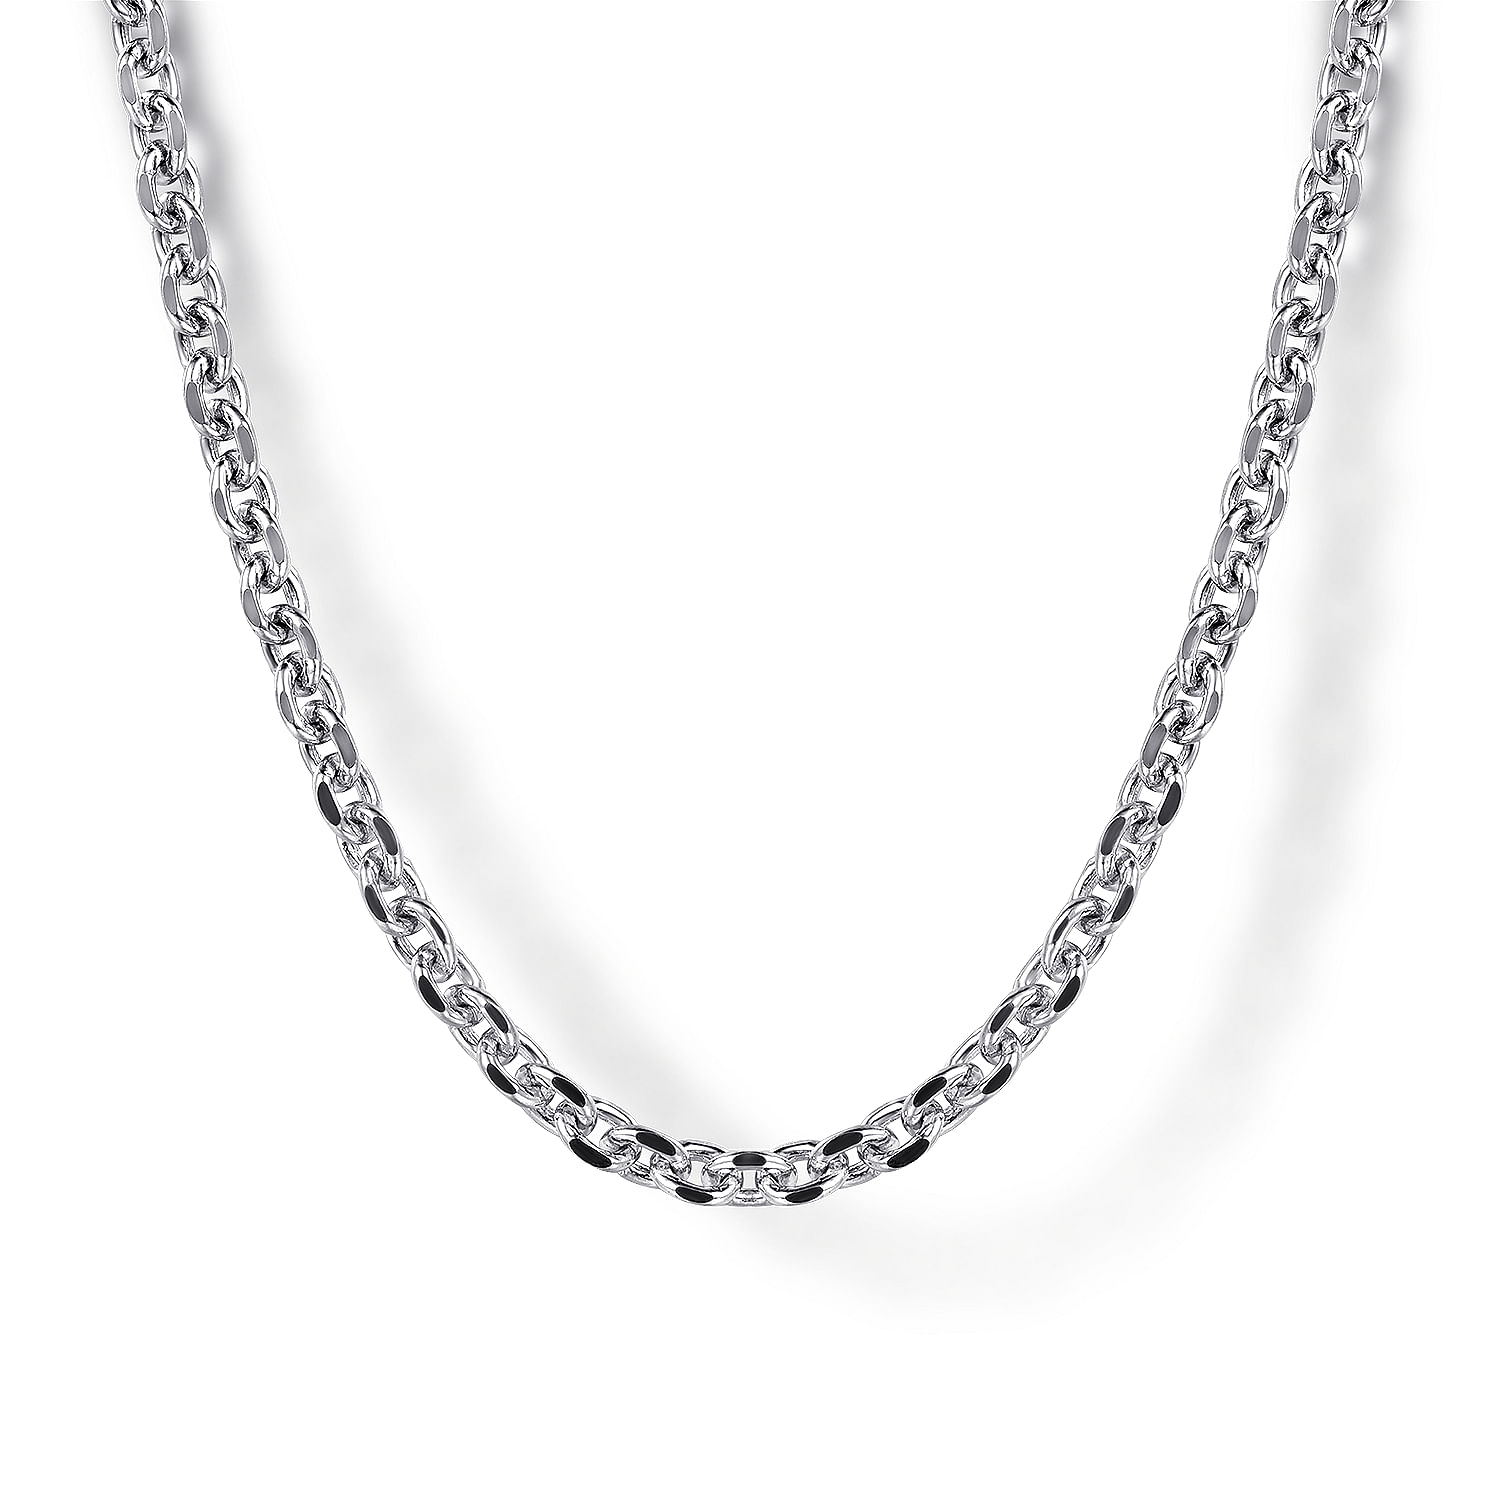 Men's Large Solid Heavy .925 Sterling Silver 8mm Thick Figaro Chain  Necklace 24 Inch